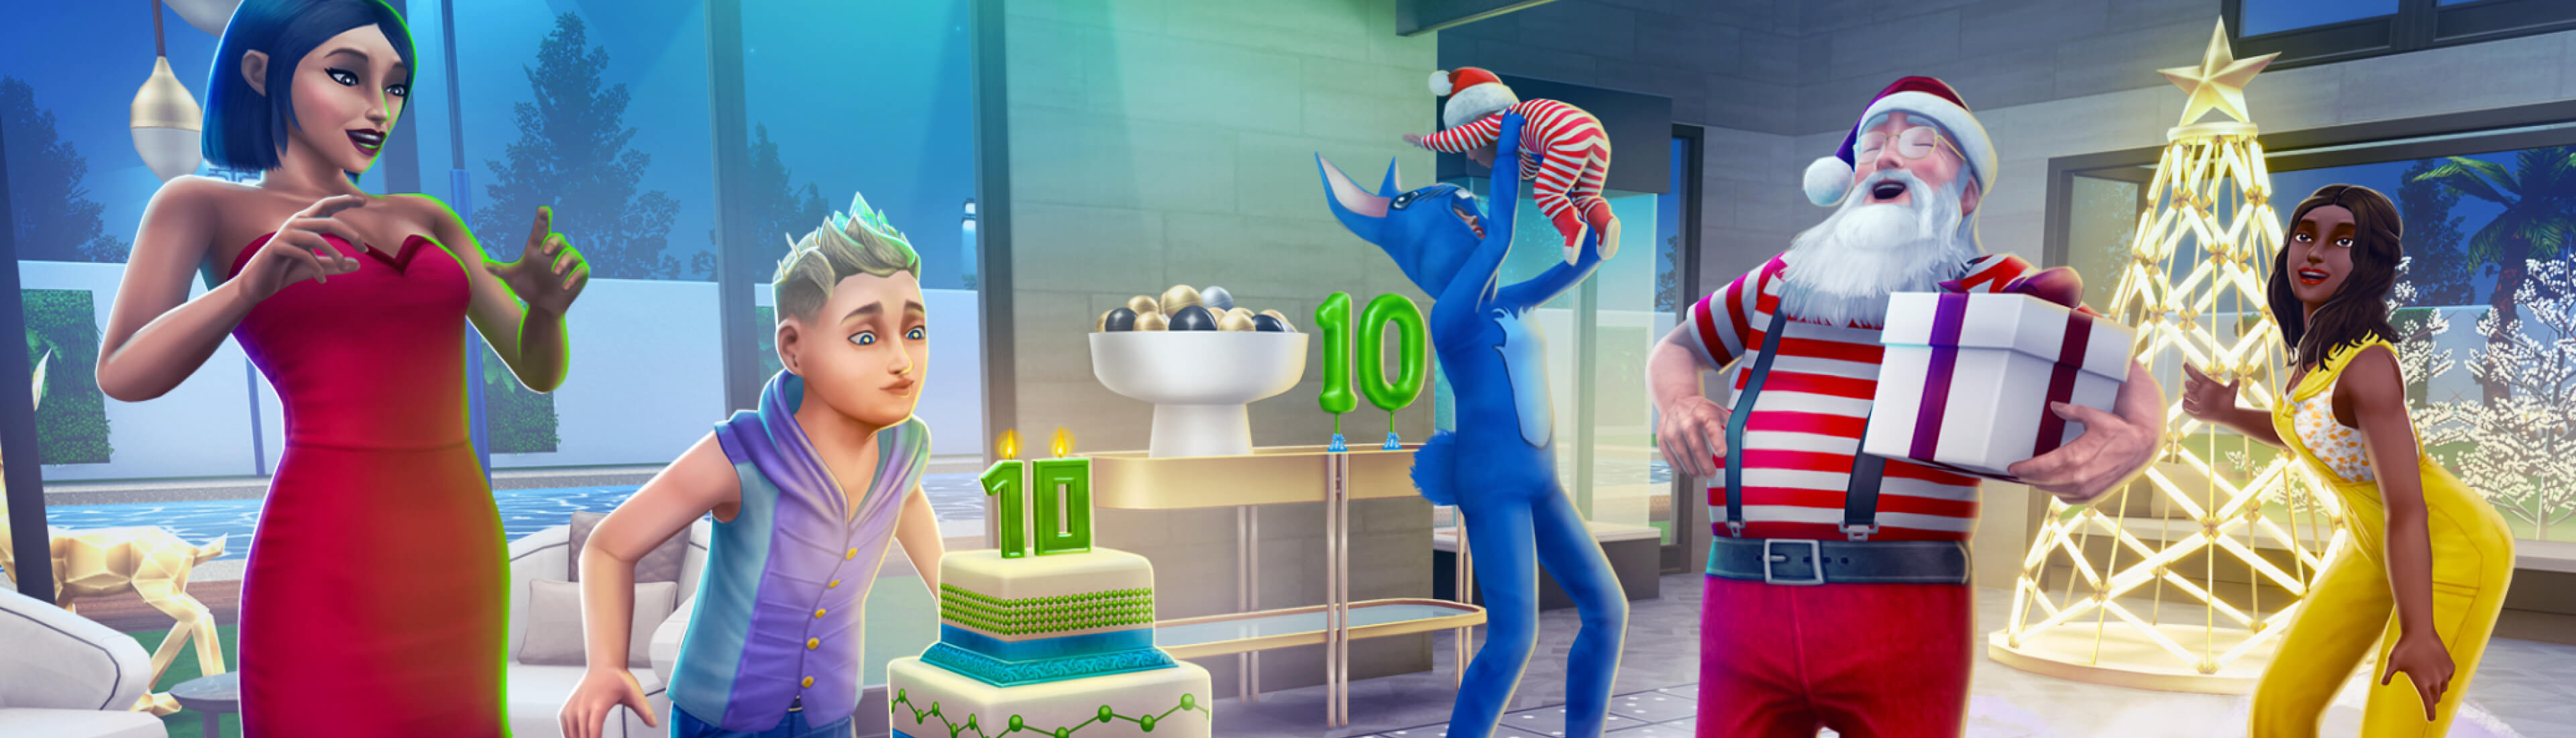 can you still play the sims when you only buy the sims 4 get to work?